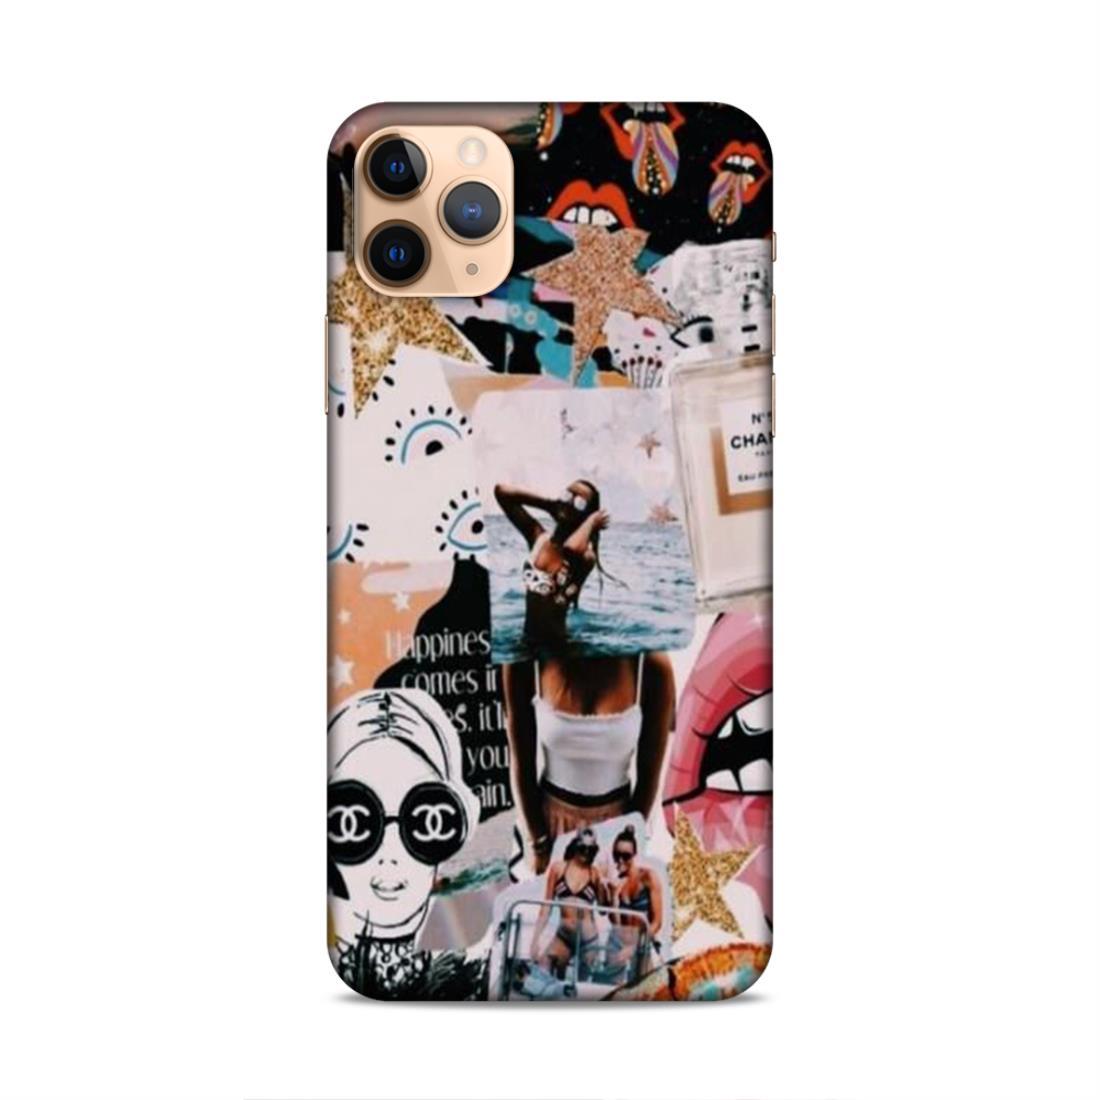 Happy Girl iPhone 11 Pro Mobile Case Cover